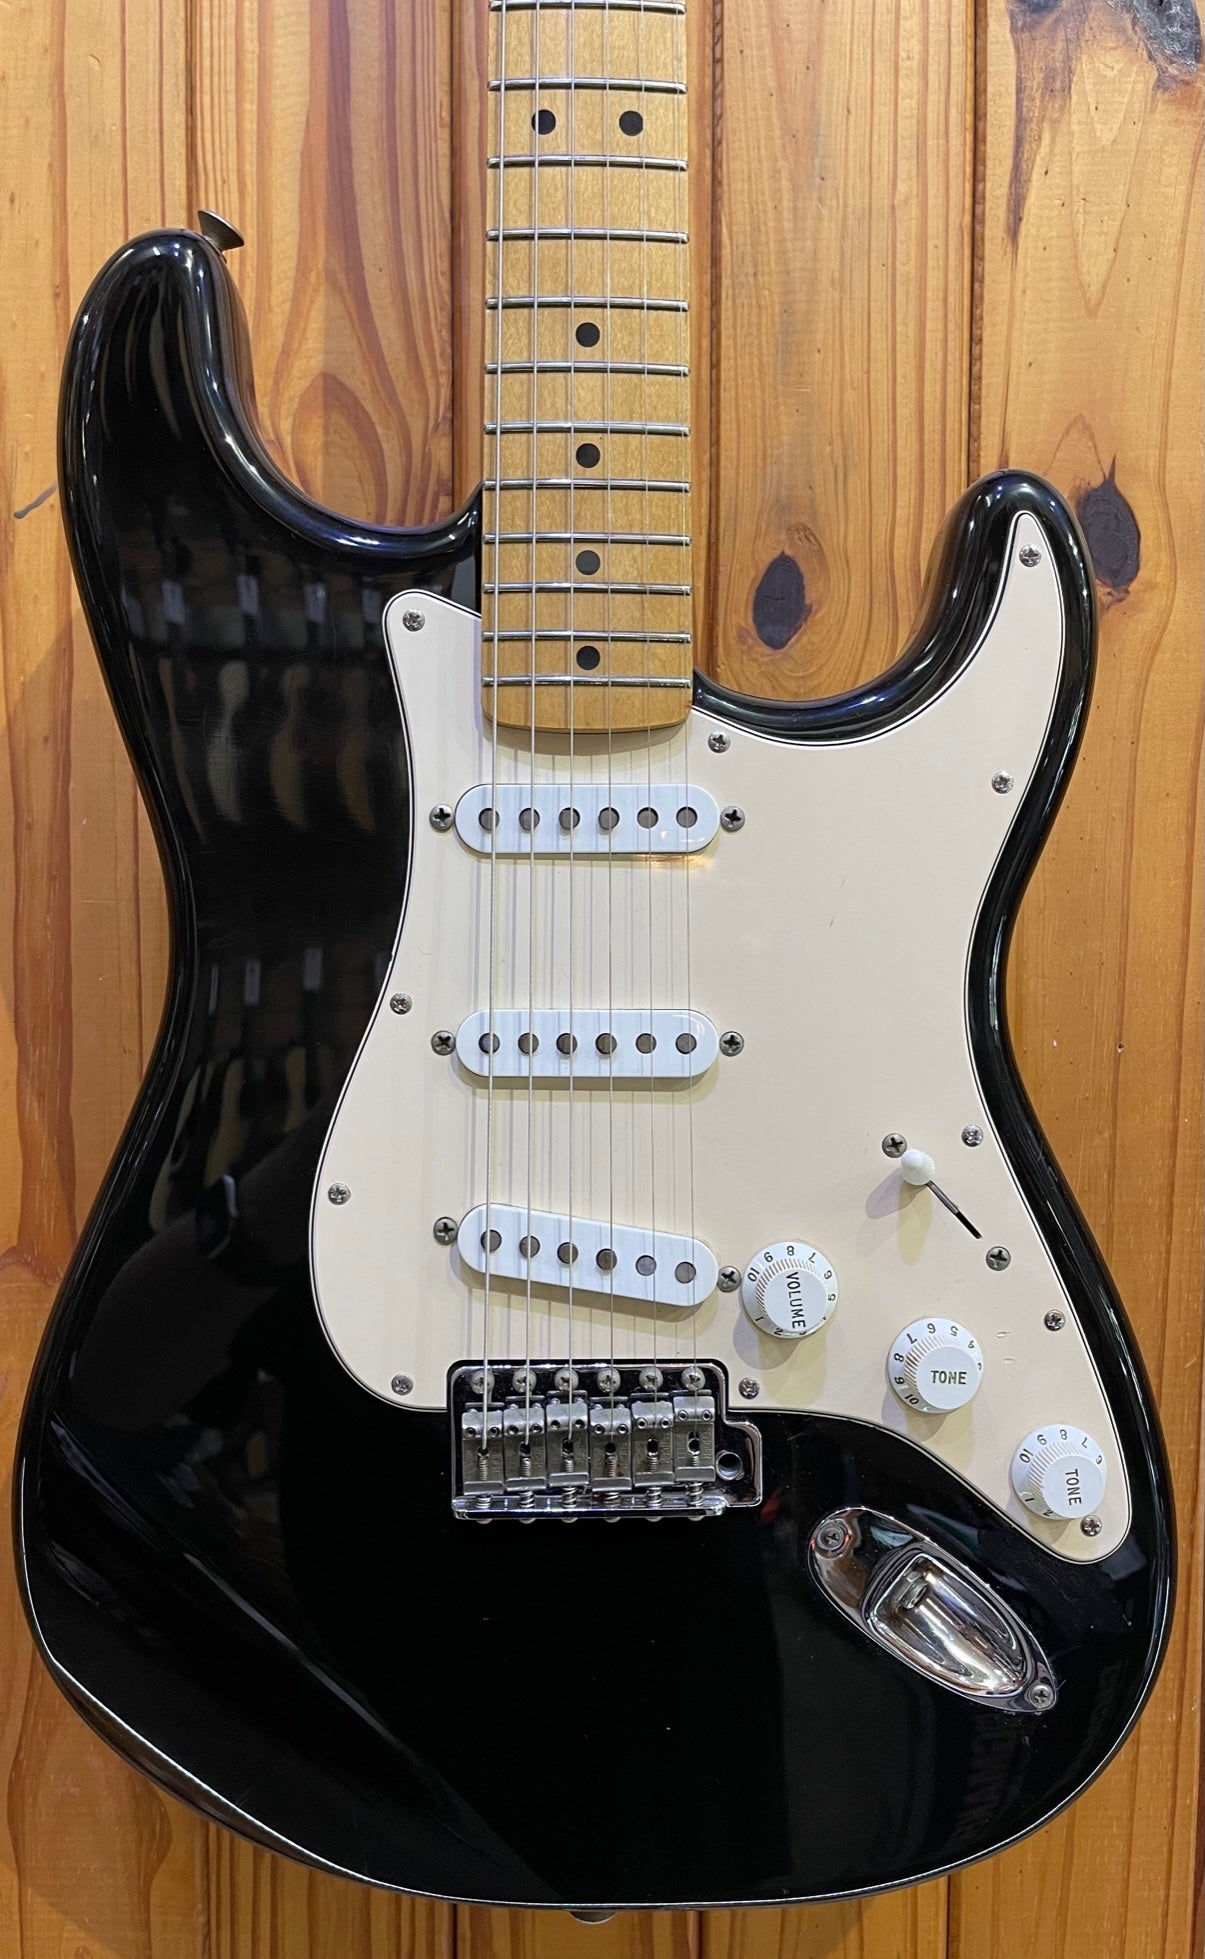 60th　Series　70s　–　Black　Fender　Stratocaster　Brothers　Classic　Anniversary　Guitar　Pre-　Online